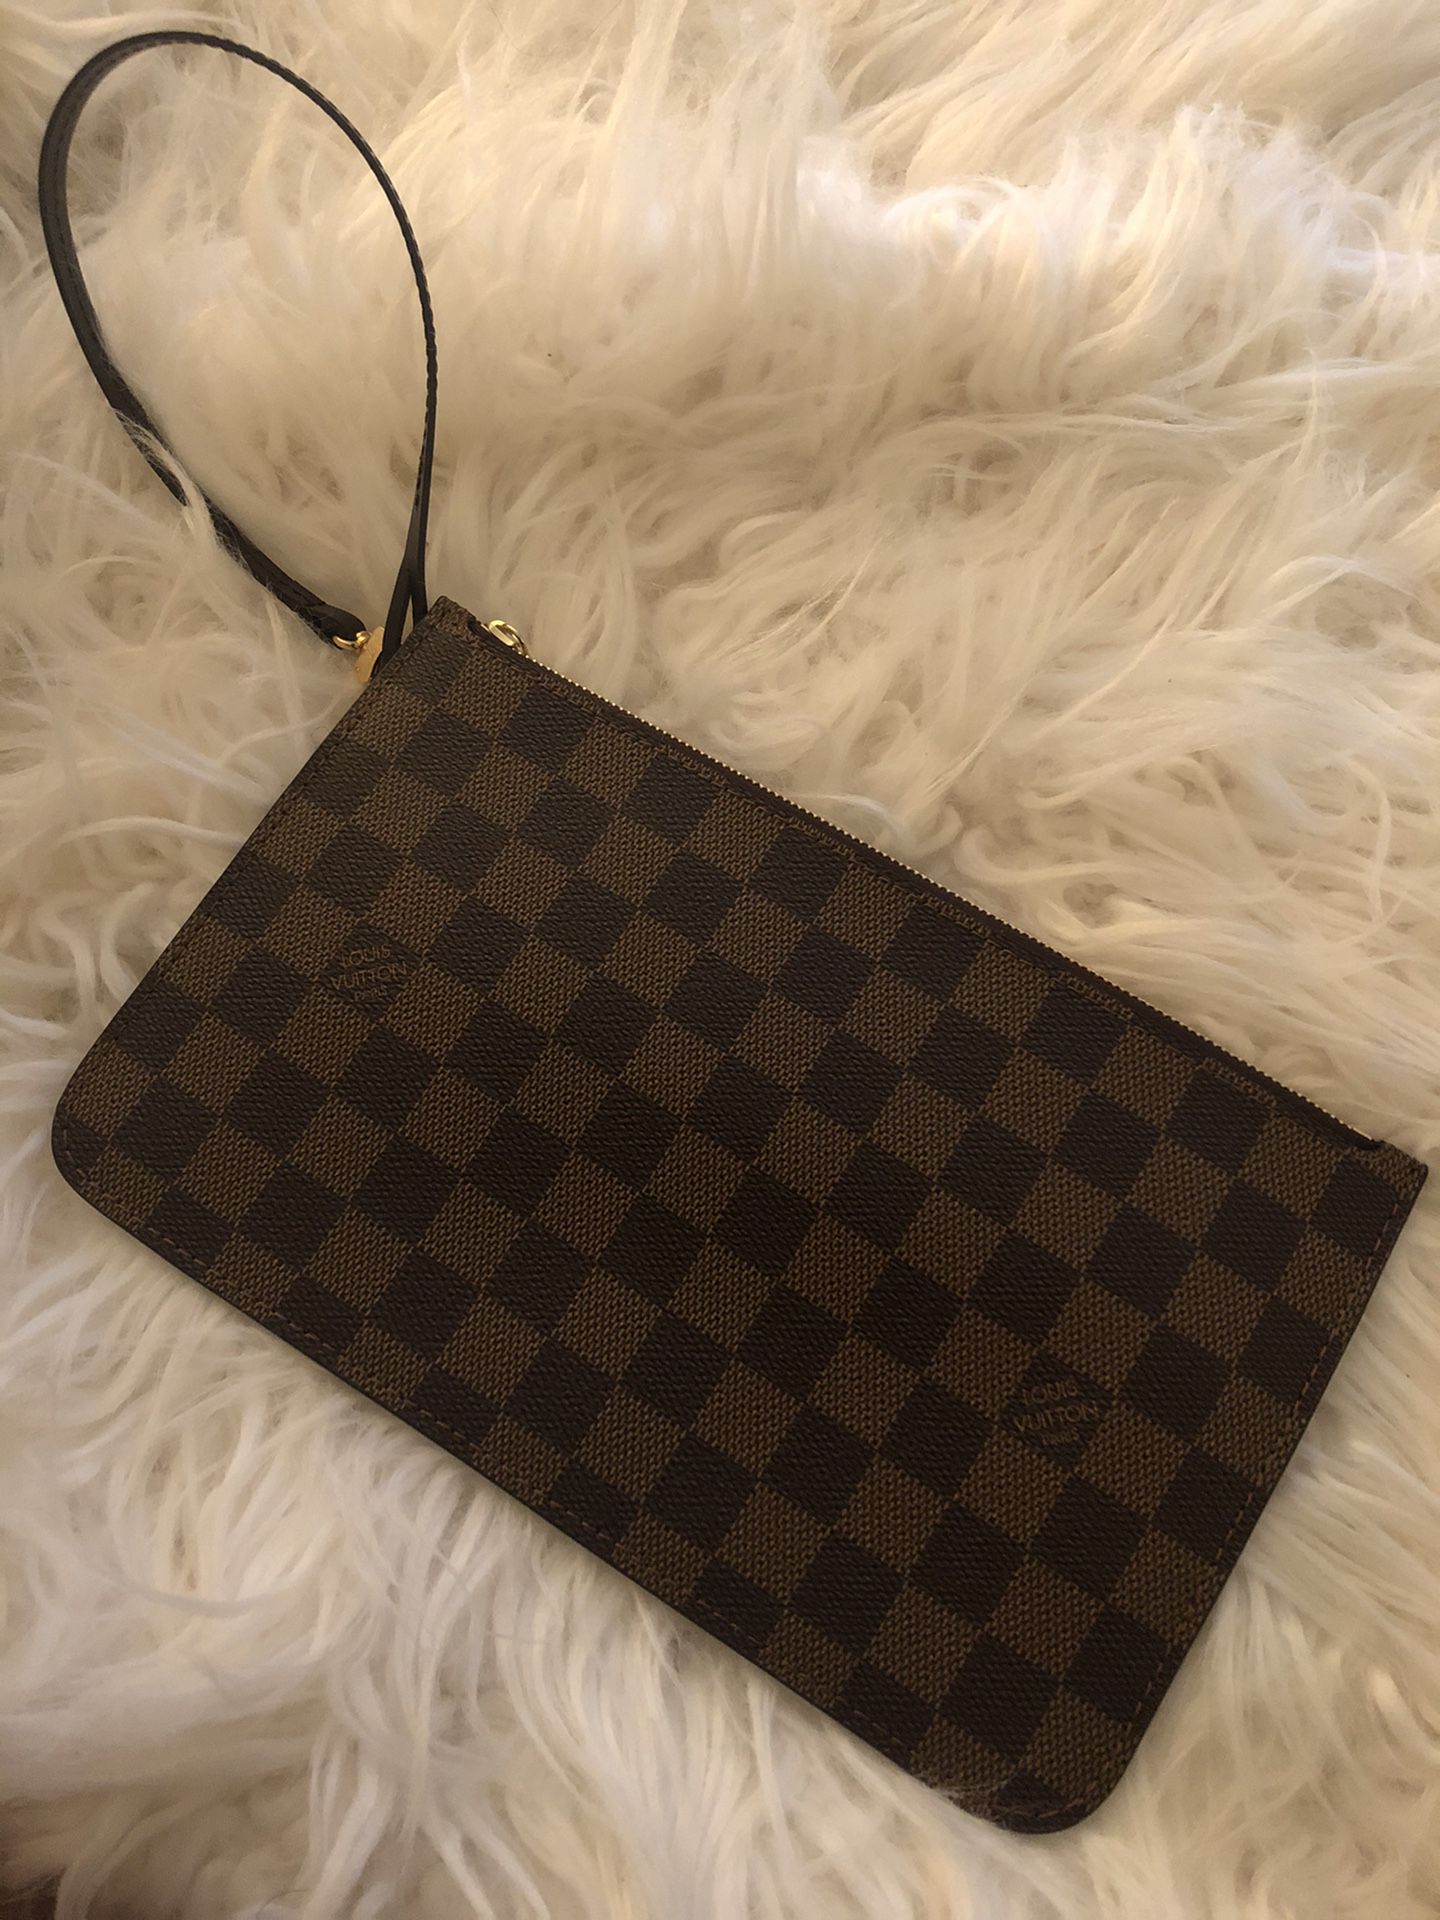 Louis Vuitton Empty Boxes and Bags for Sale in Houston, TX - OfferUp